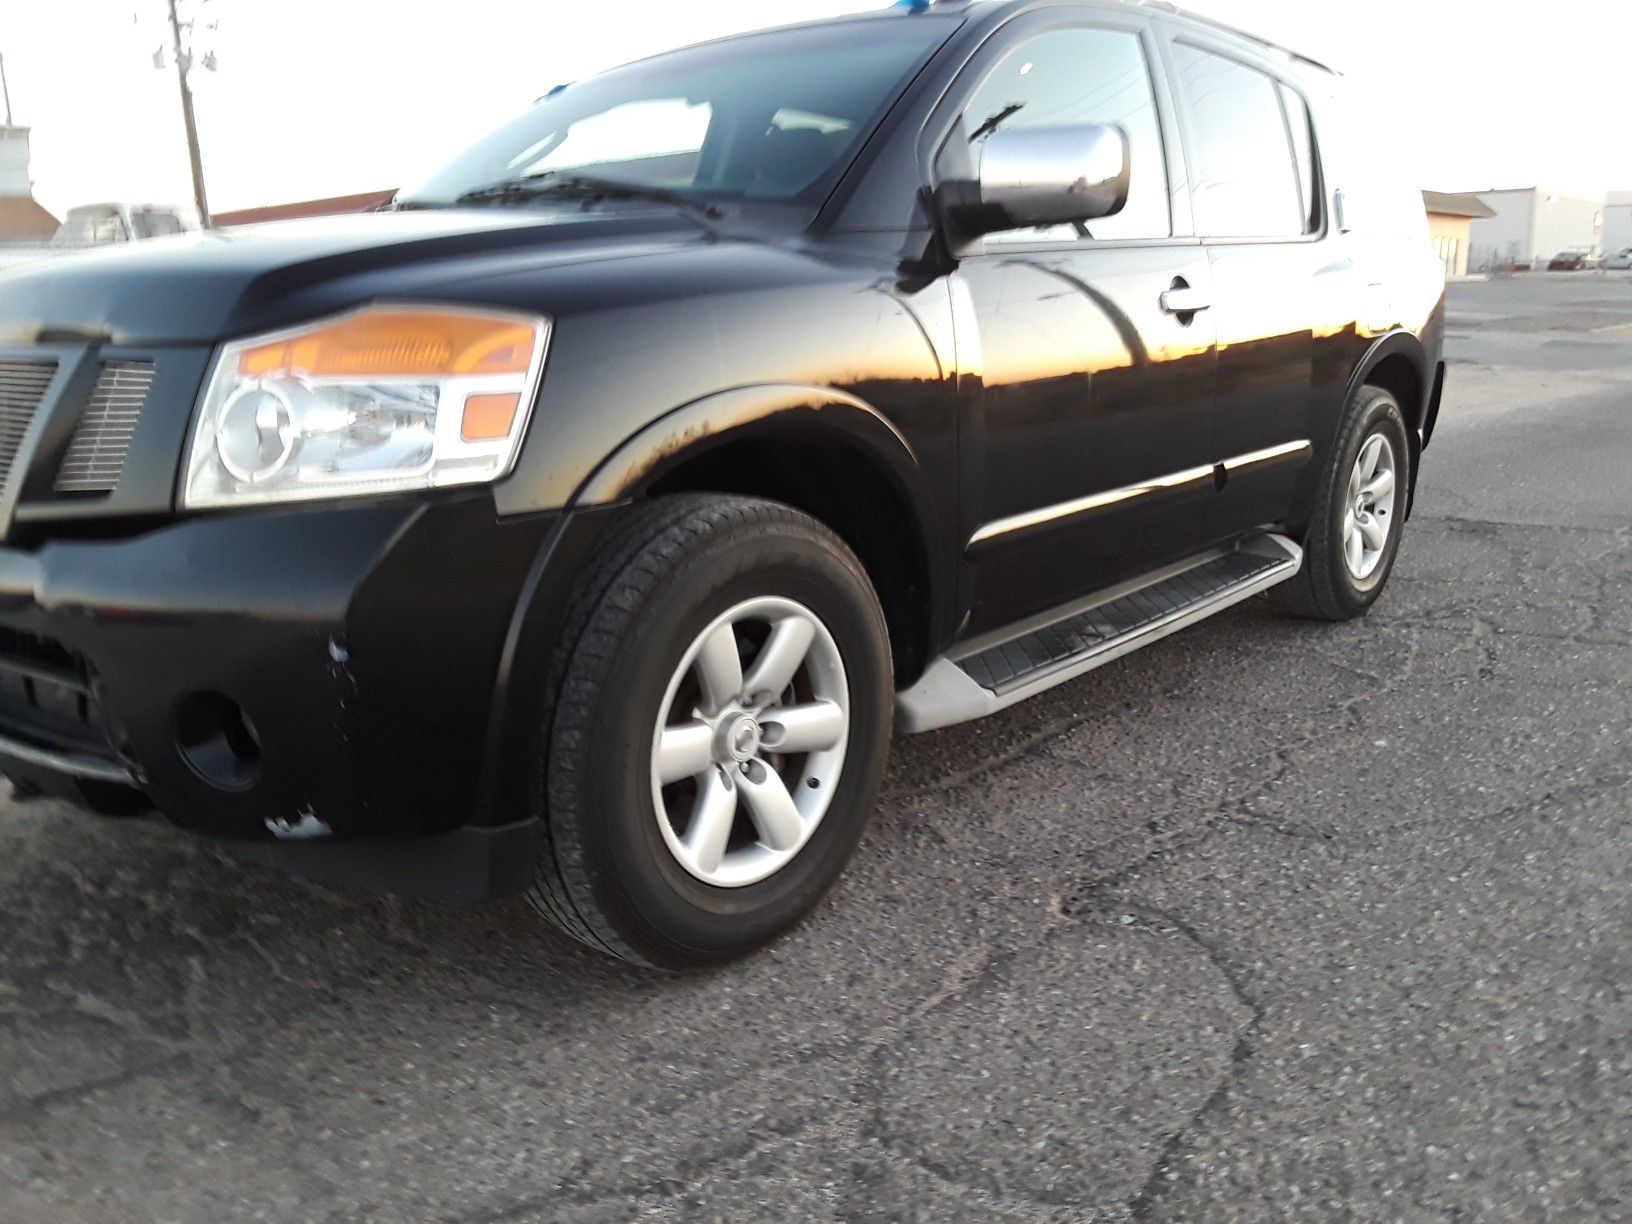 2011 Nissan Armada beautiful family suv low mileage ac cold 5000 obo plates up to date